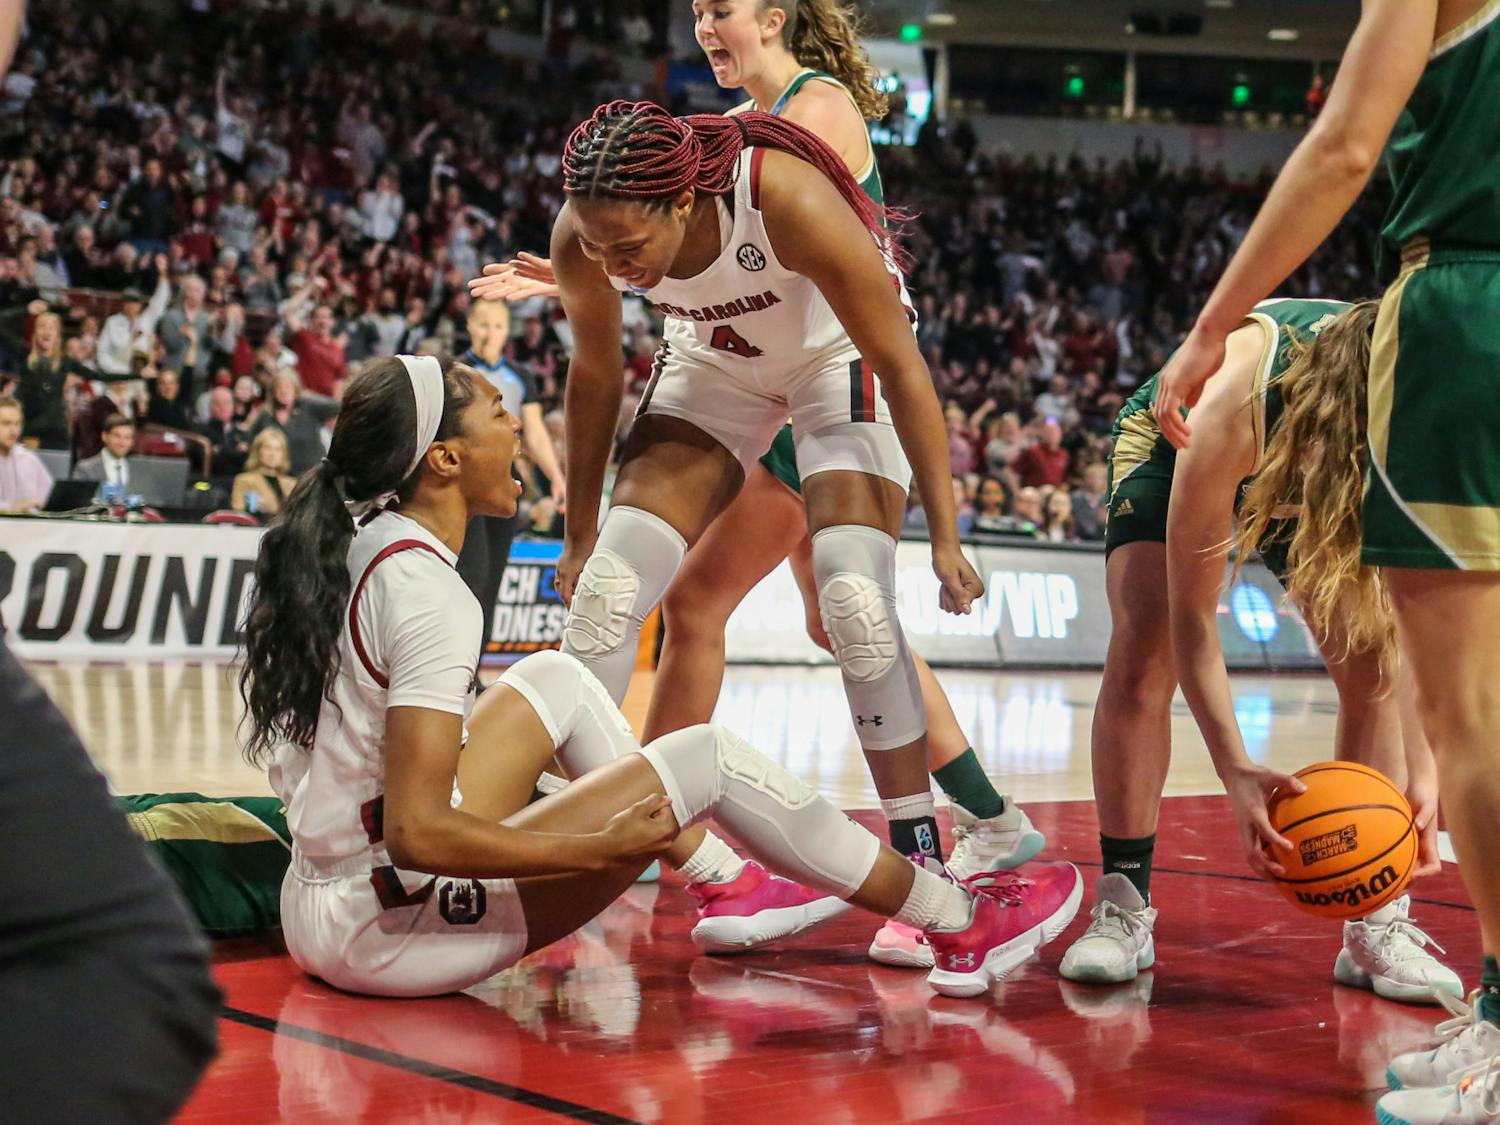 Senior forward Aliyah Boston and sophomore guard Bree Hall celebrate after drawing a foul during South Carolina’s game against South Florida in round two of the NCAA tournament at Colonial Life Arena on March 19, 2023. The Gamecocks defeated the Bulls 76-45.